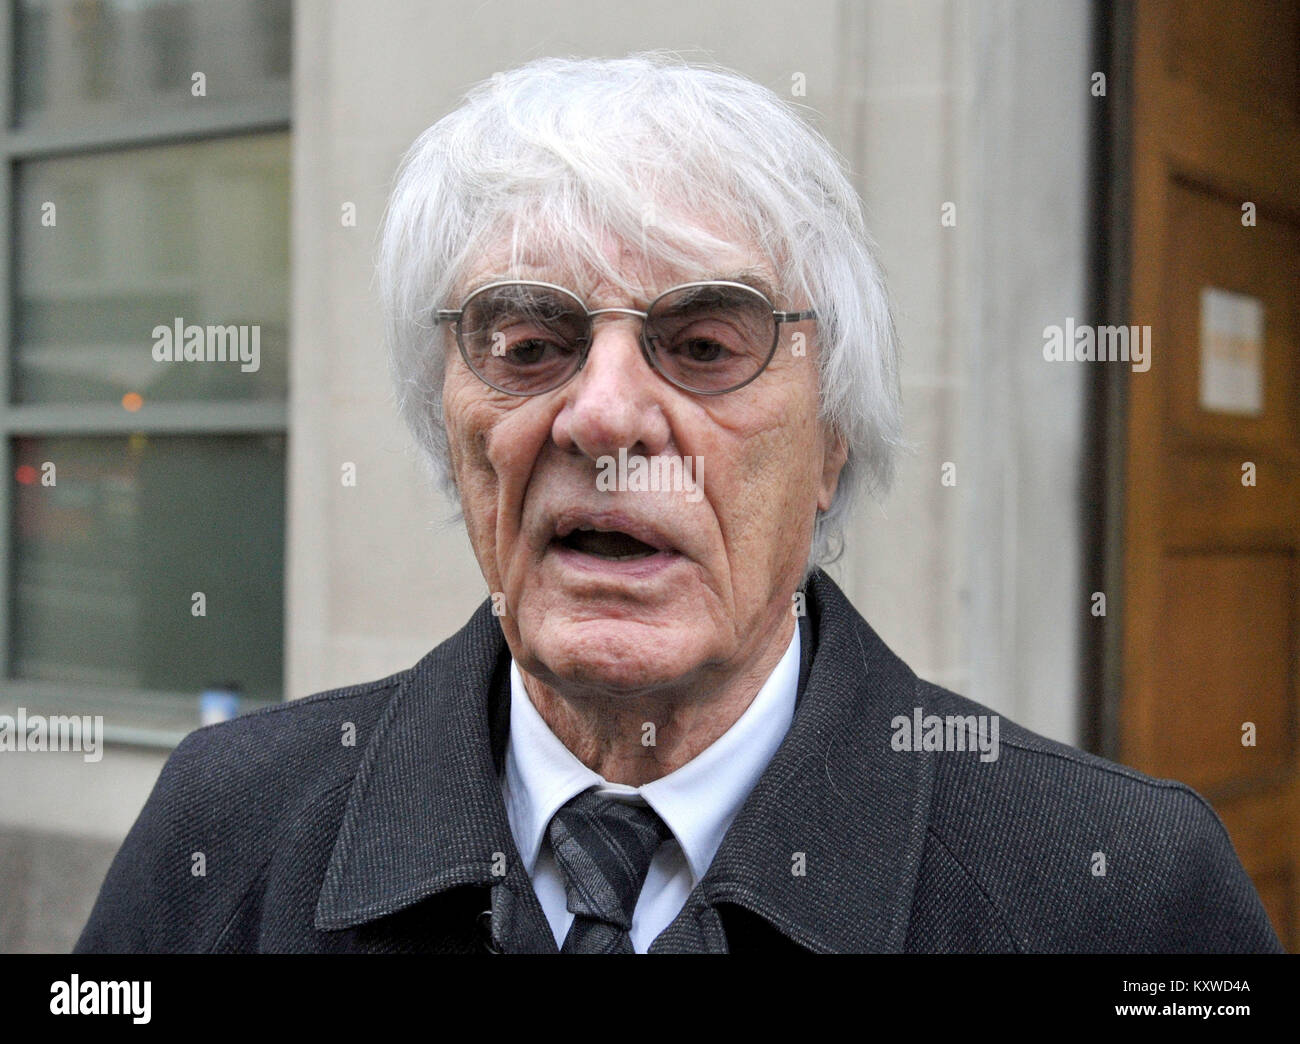 Tycoon Bernie Ecclestone leaving London's Central Family Court, where his daughter Petra Ecclestone had the latest hearing in her divorce battle with ex-husband James Stunt. Stock Photo